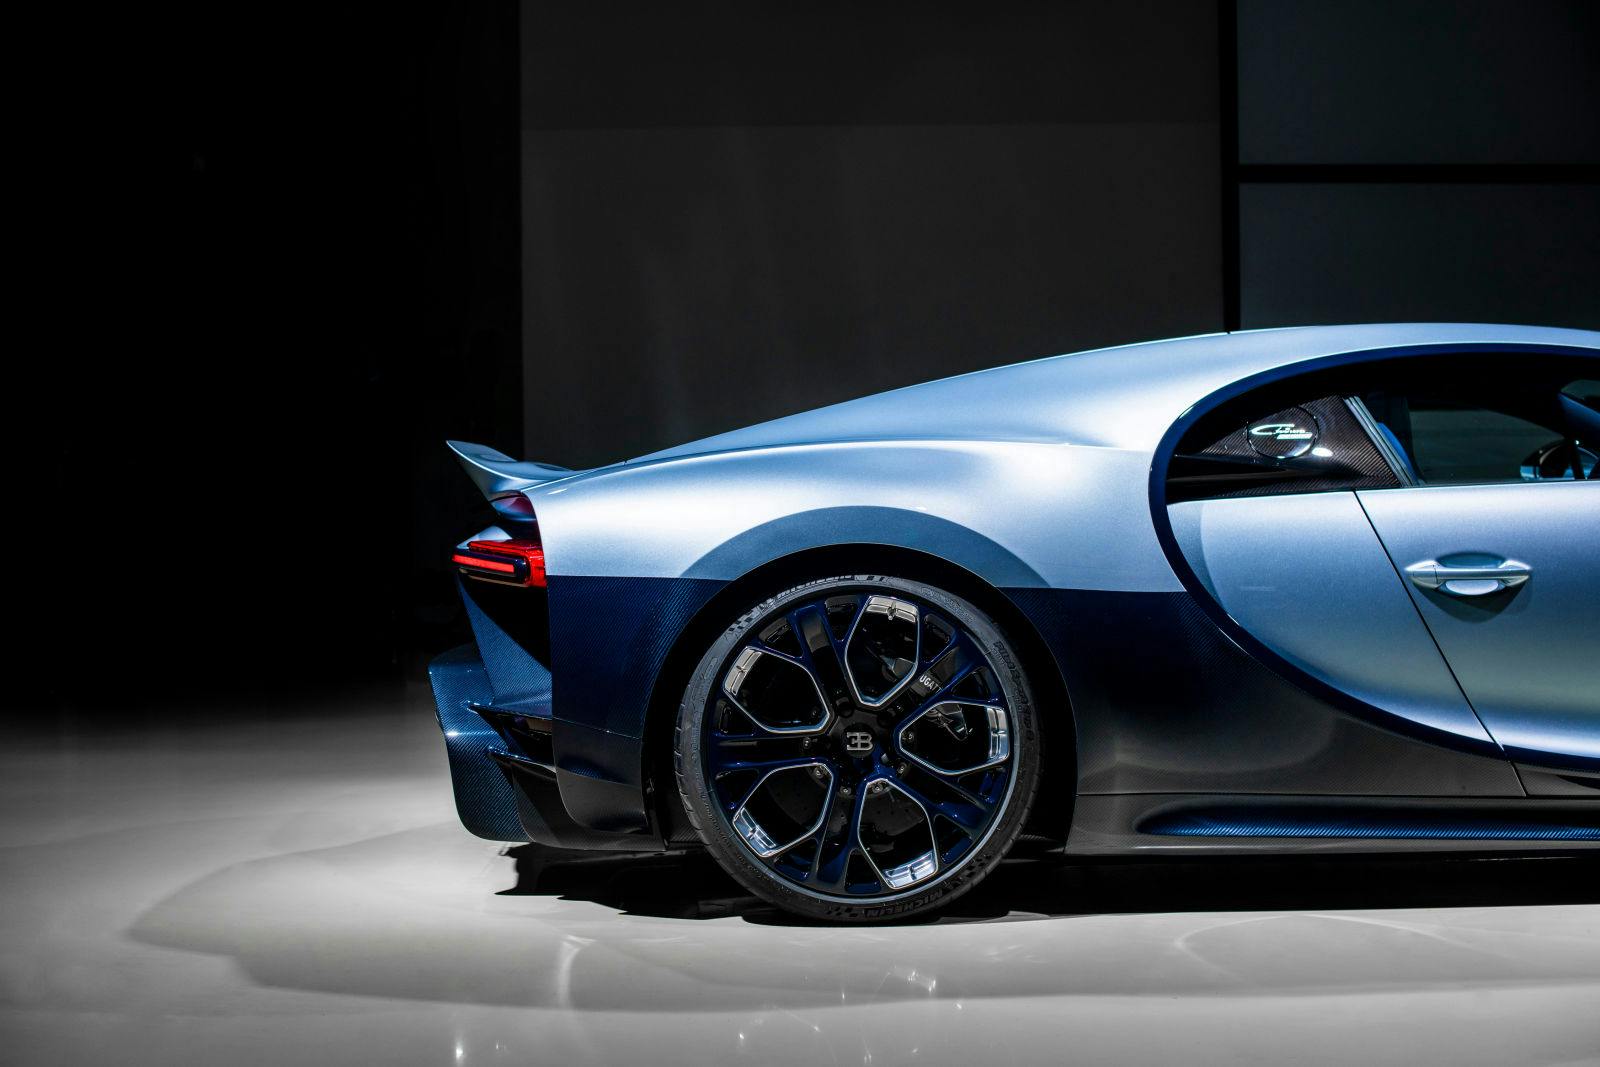 The Bugatti Profilée  is presented in a color exclusively developed for it.